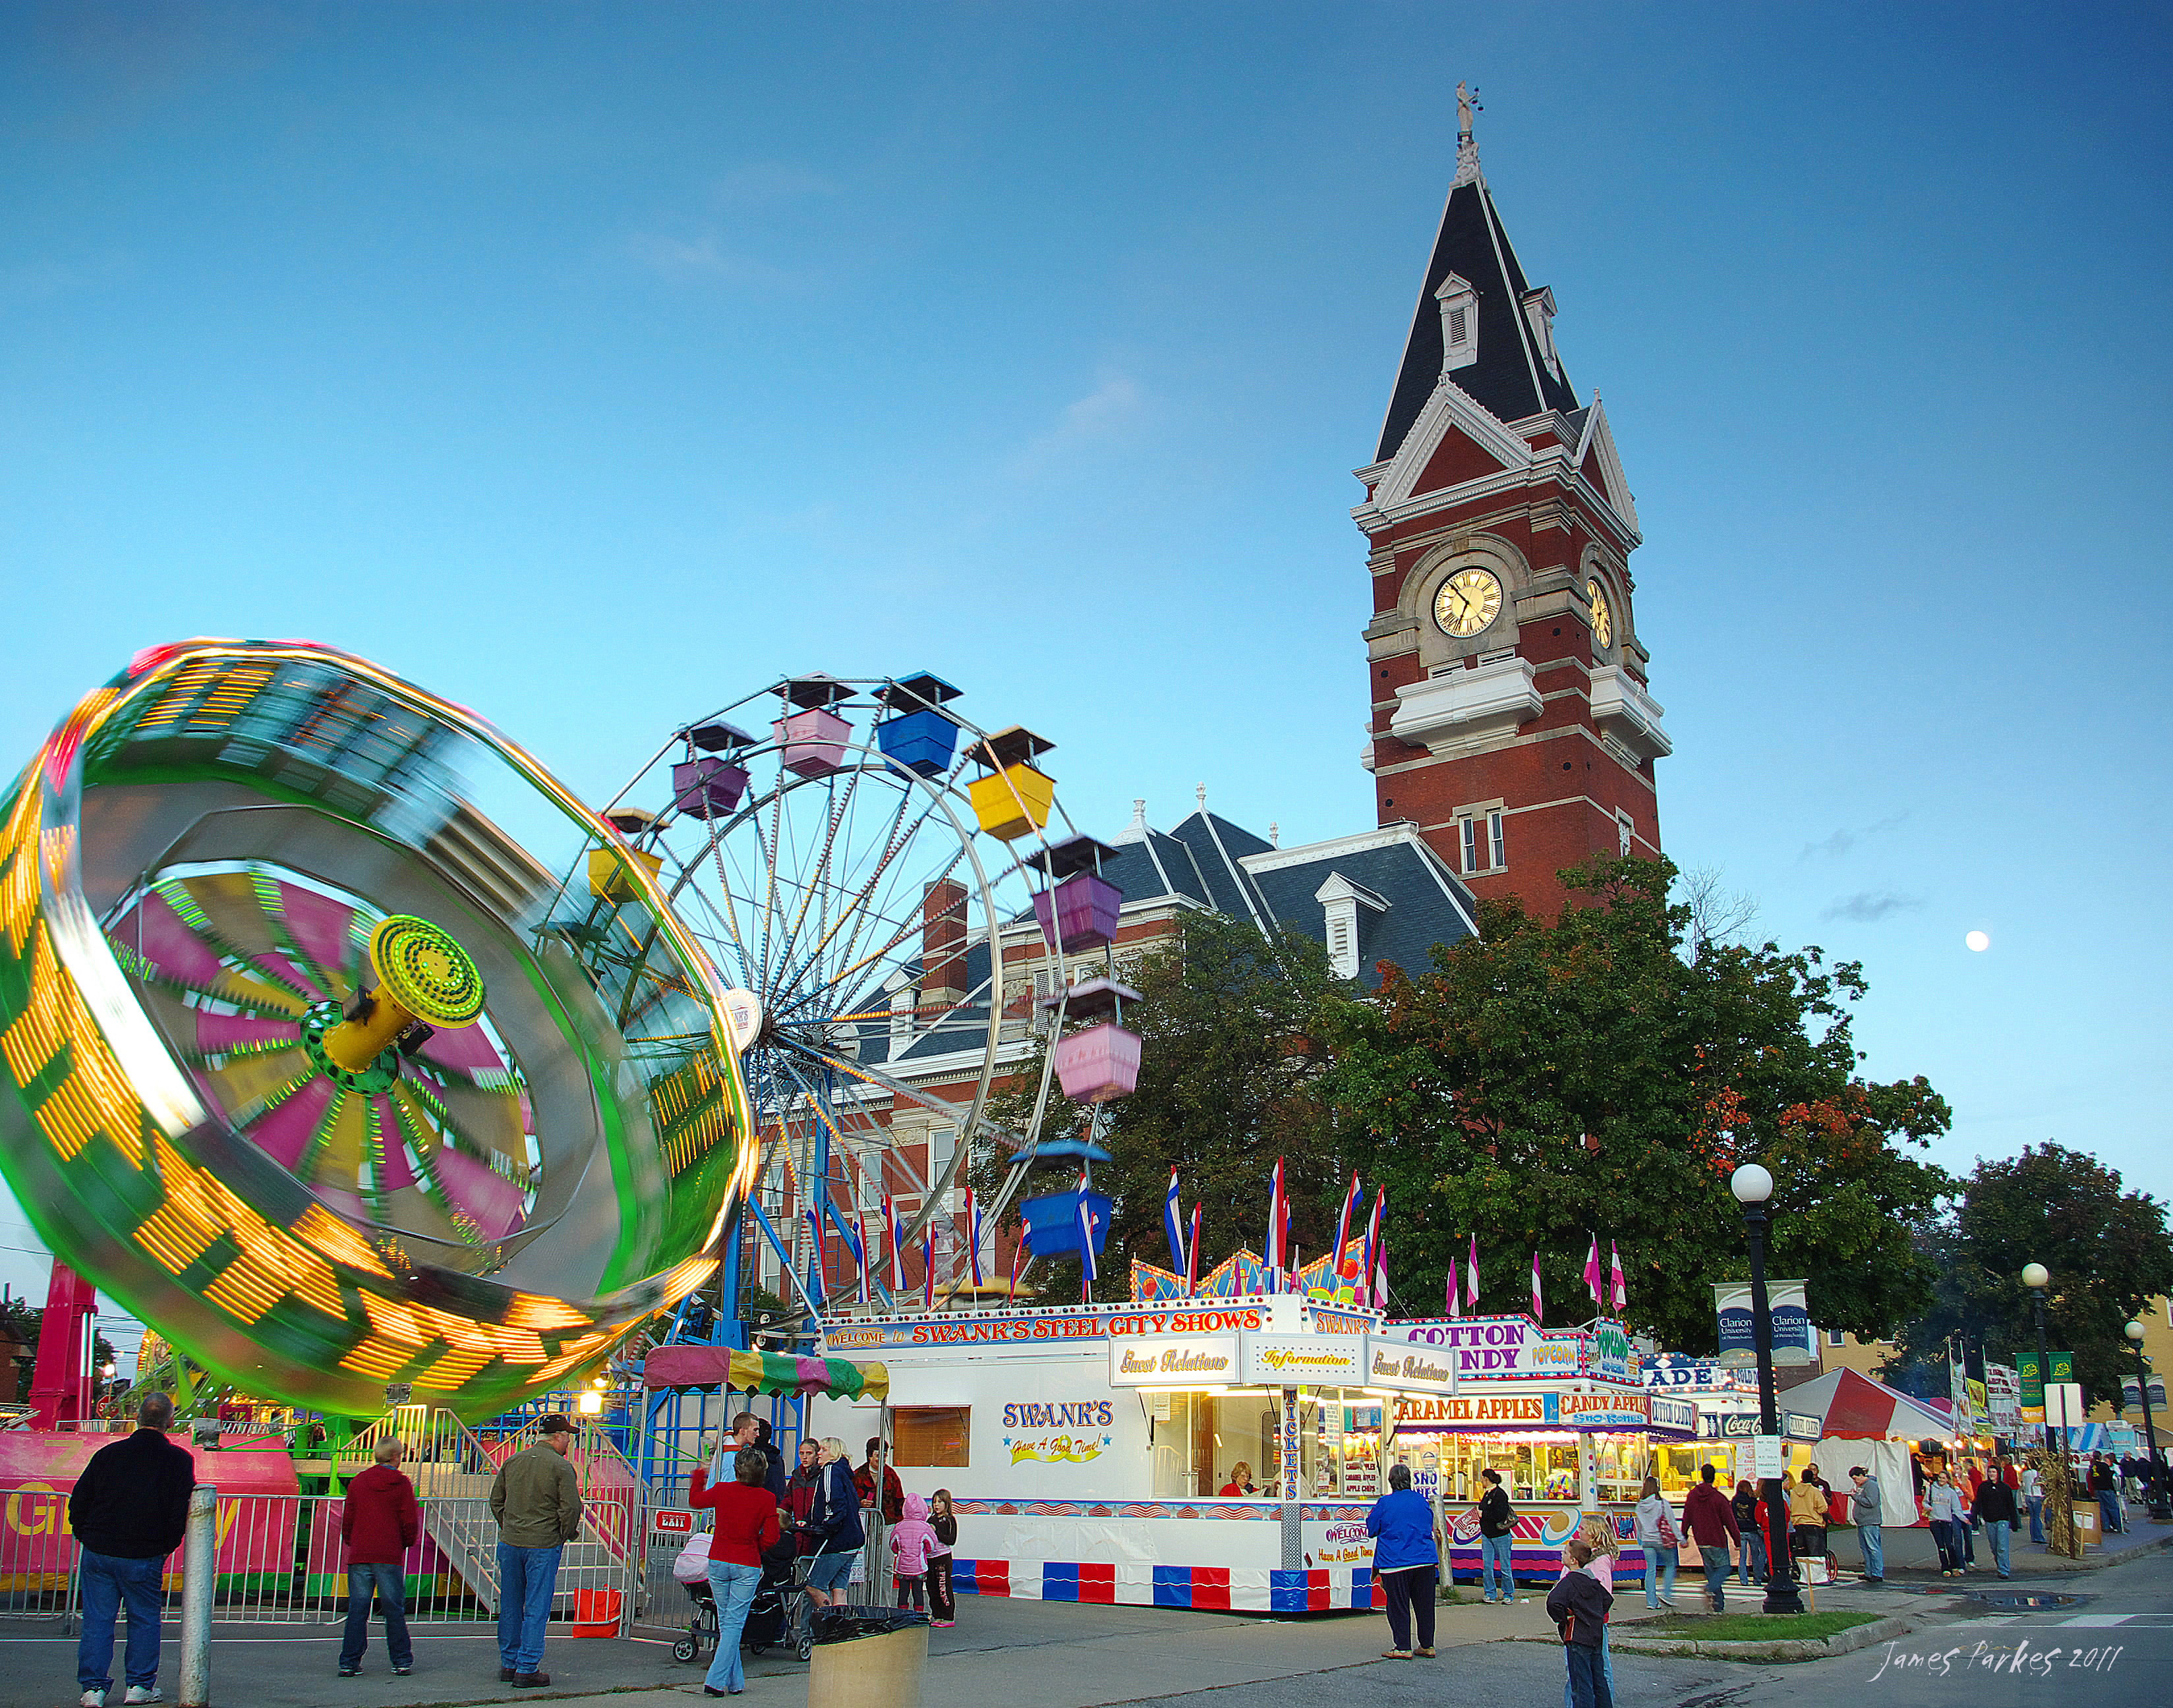 Clarion County Courthouse and Festival carnival at dusk